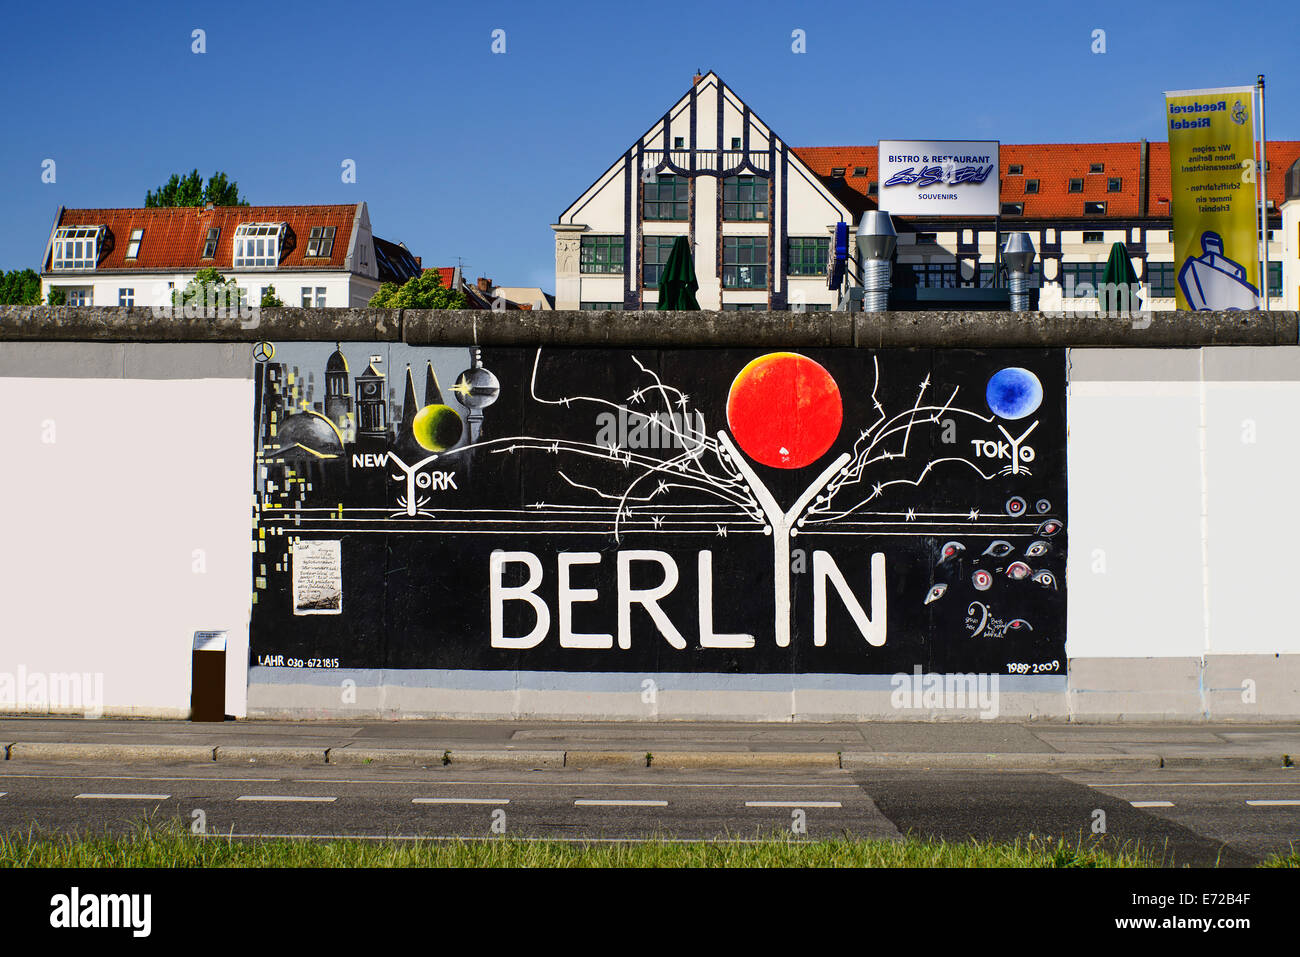 - Berlin prominently Alamy section Berlin of a displayed Stock Gallery word km with the The East mural Wall Side Germany, Berlin, 1.3 Photo the long